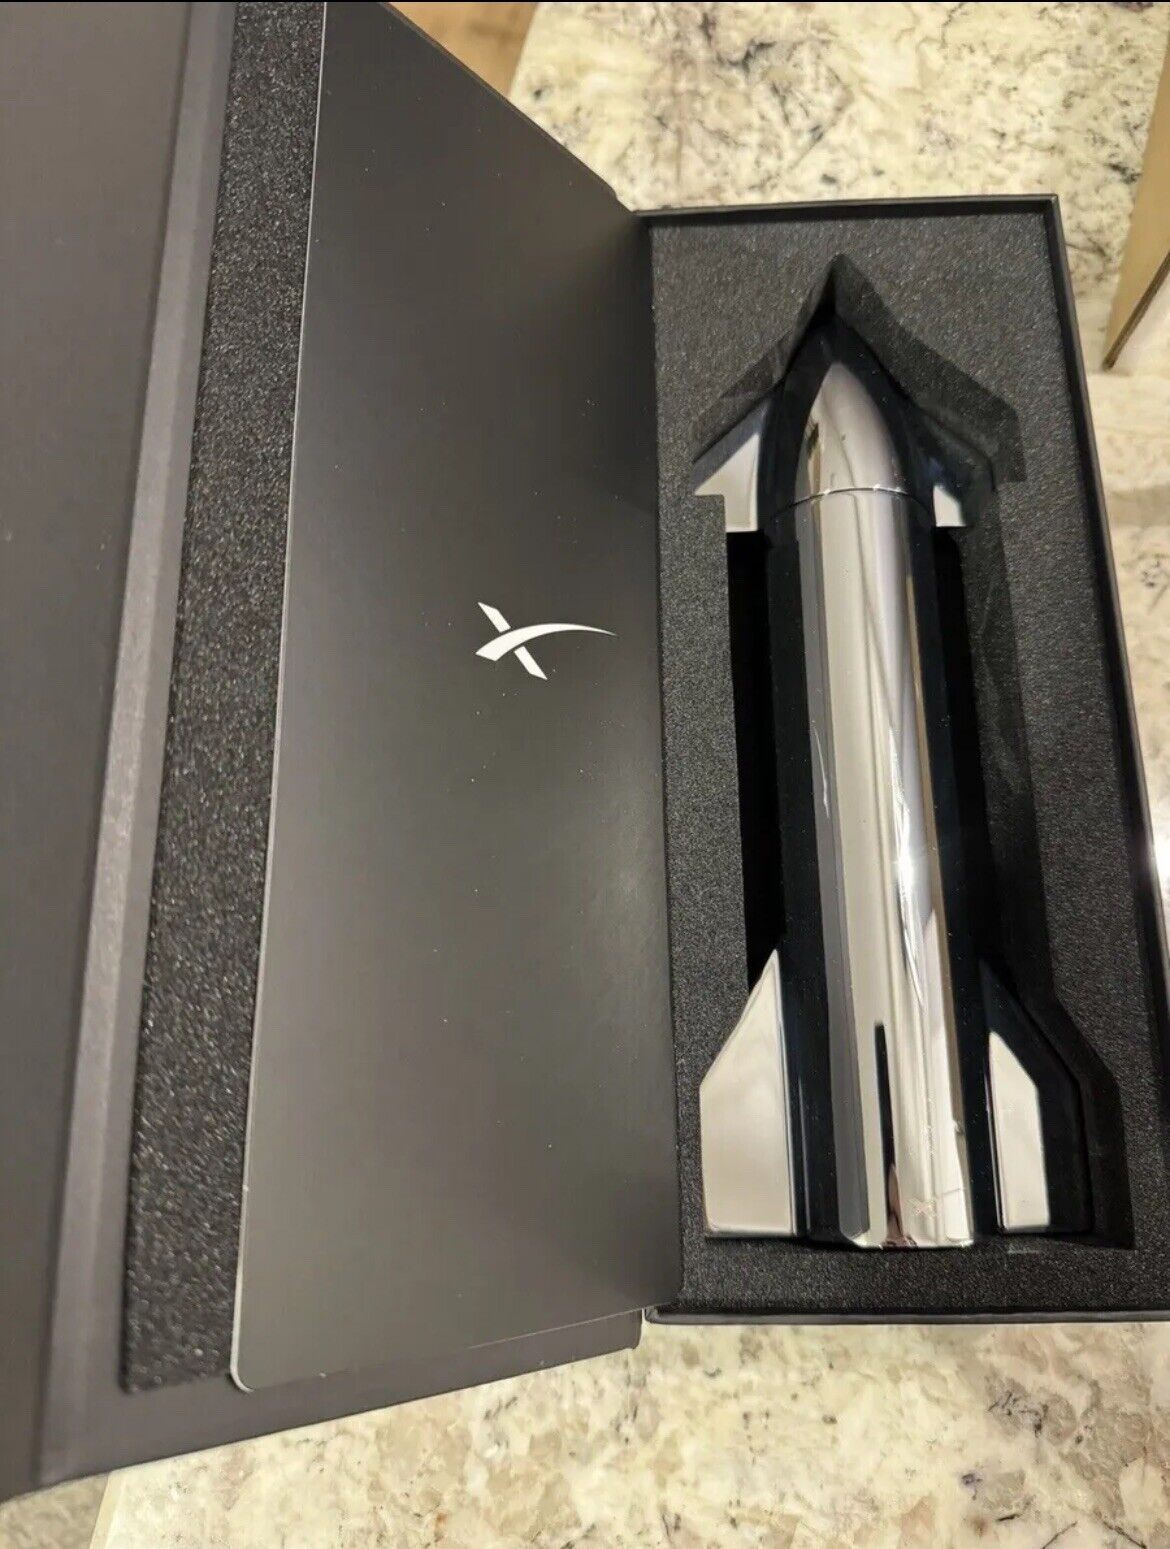 SpaceX Starship Torch New in Box LIMITED & SOLD OUT IN HAND 🎄